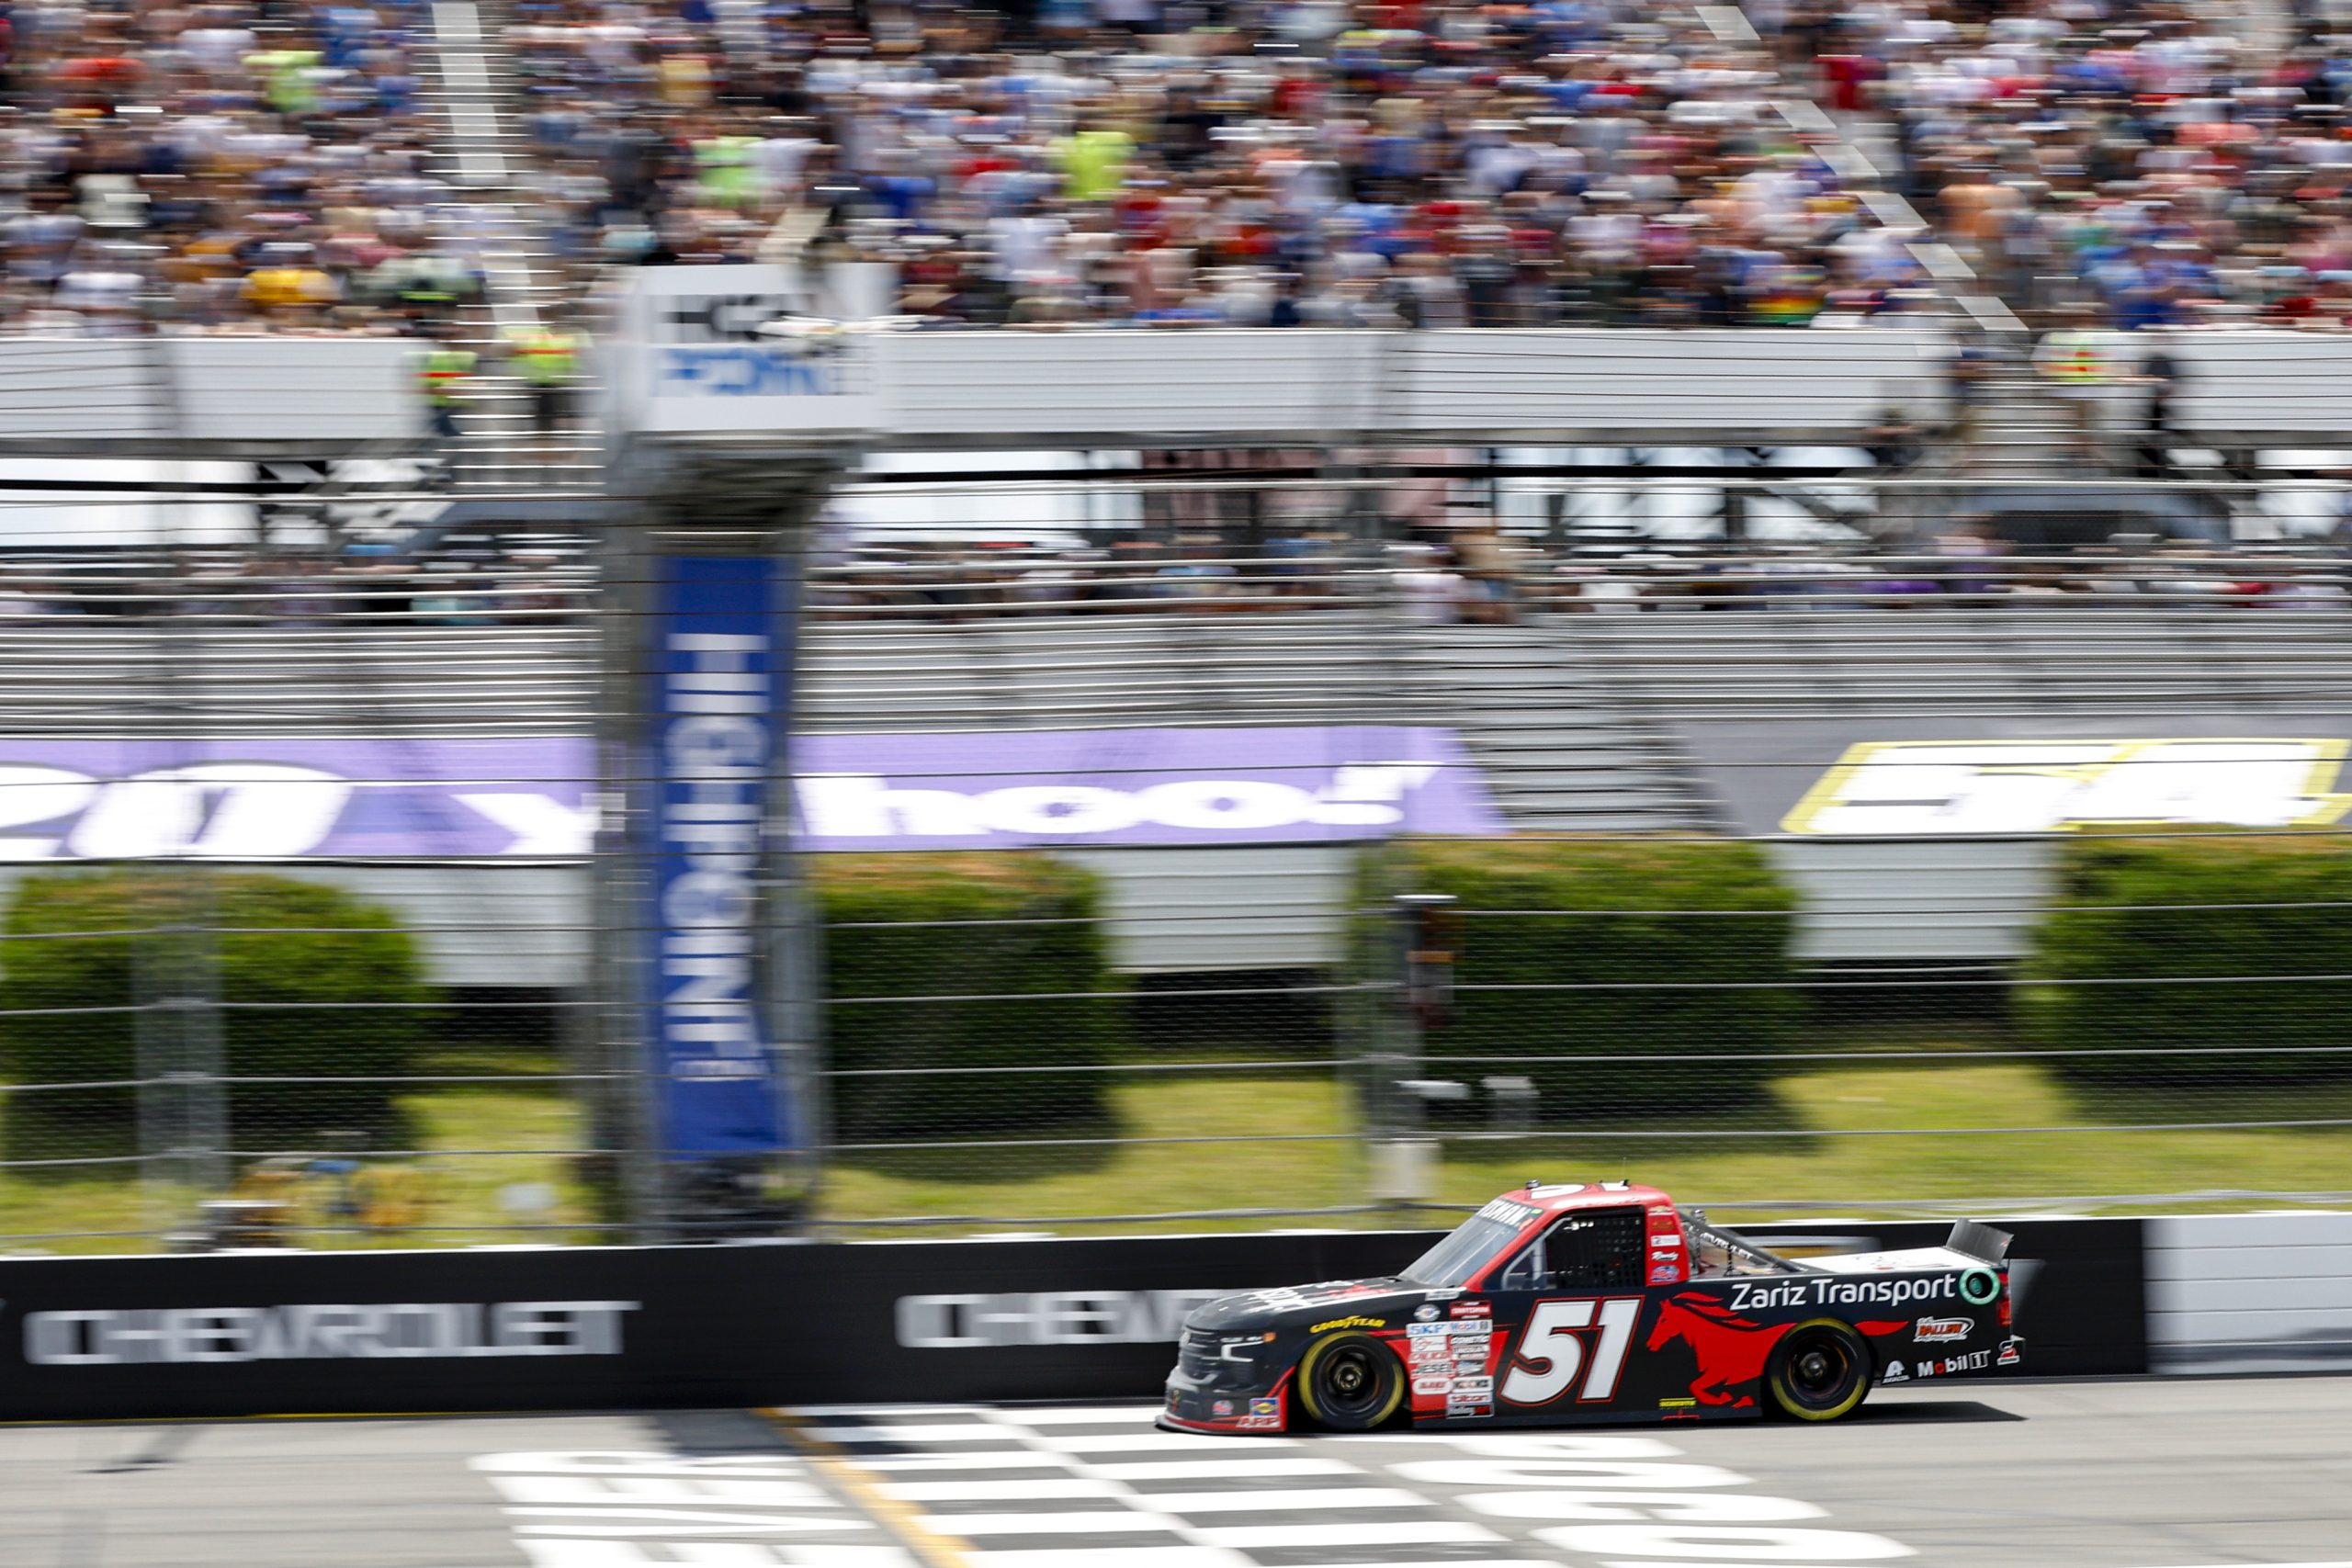 Kyle Busch, driver of the #51 Zariz Transport Chevrolet, crosses the finish line to win the NASCAR Craftsman Truck Series CRC Brakleen 150 at Pocono Raceway on July 22, 2023